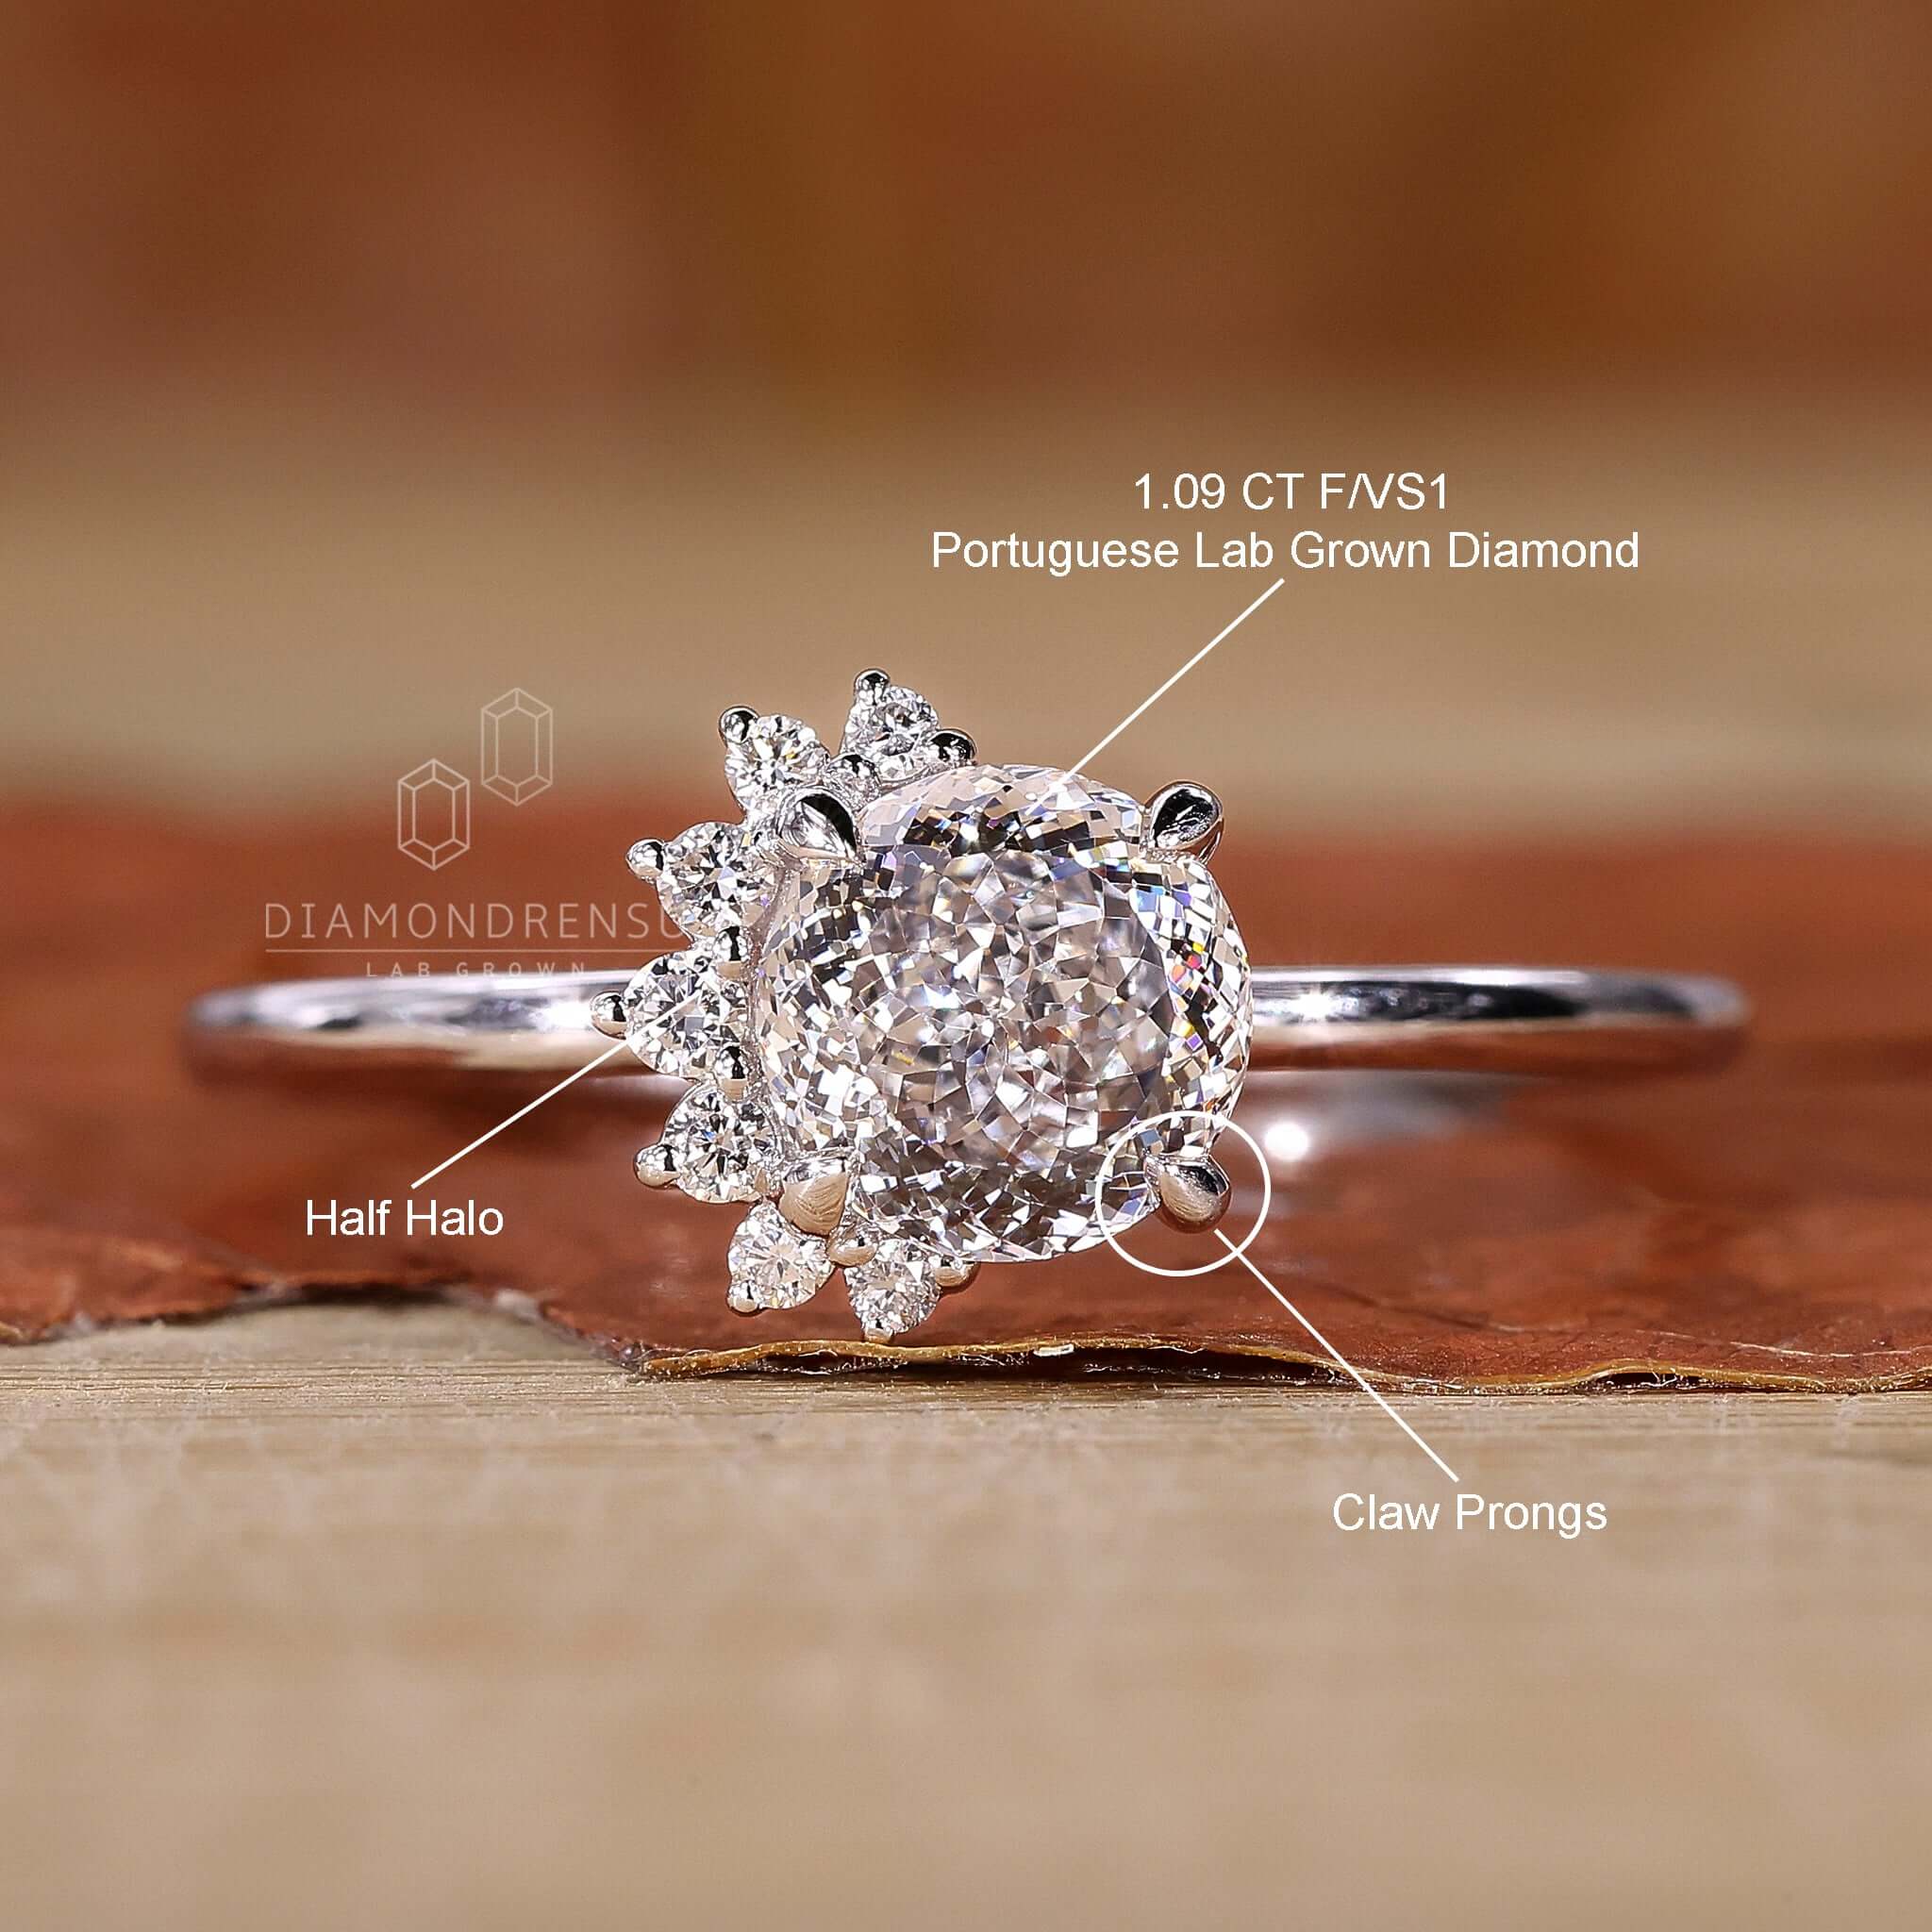 Is This a Dream - Diamond Ring - Kirrilly Rose Jewellery Engagement Rings  Byron Bay